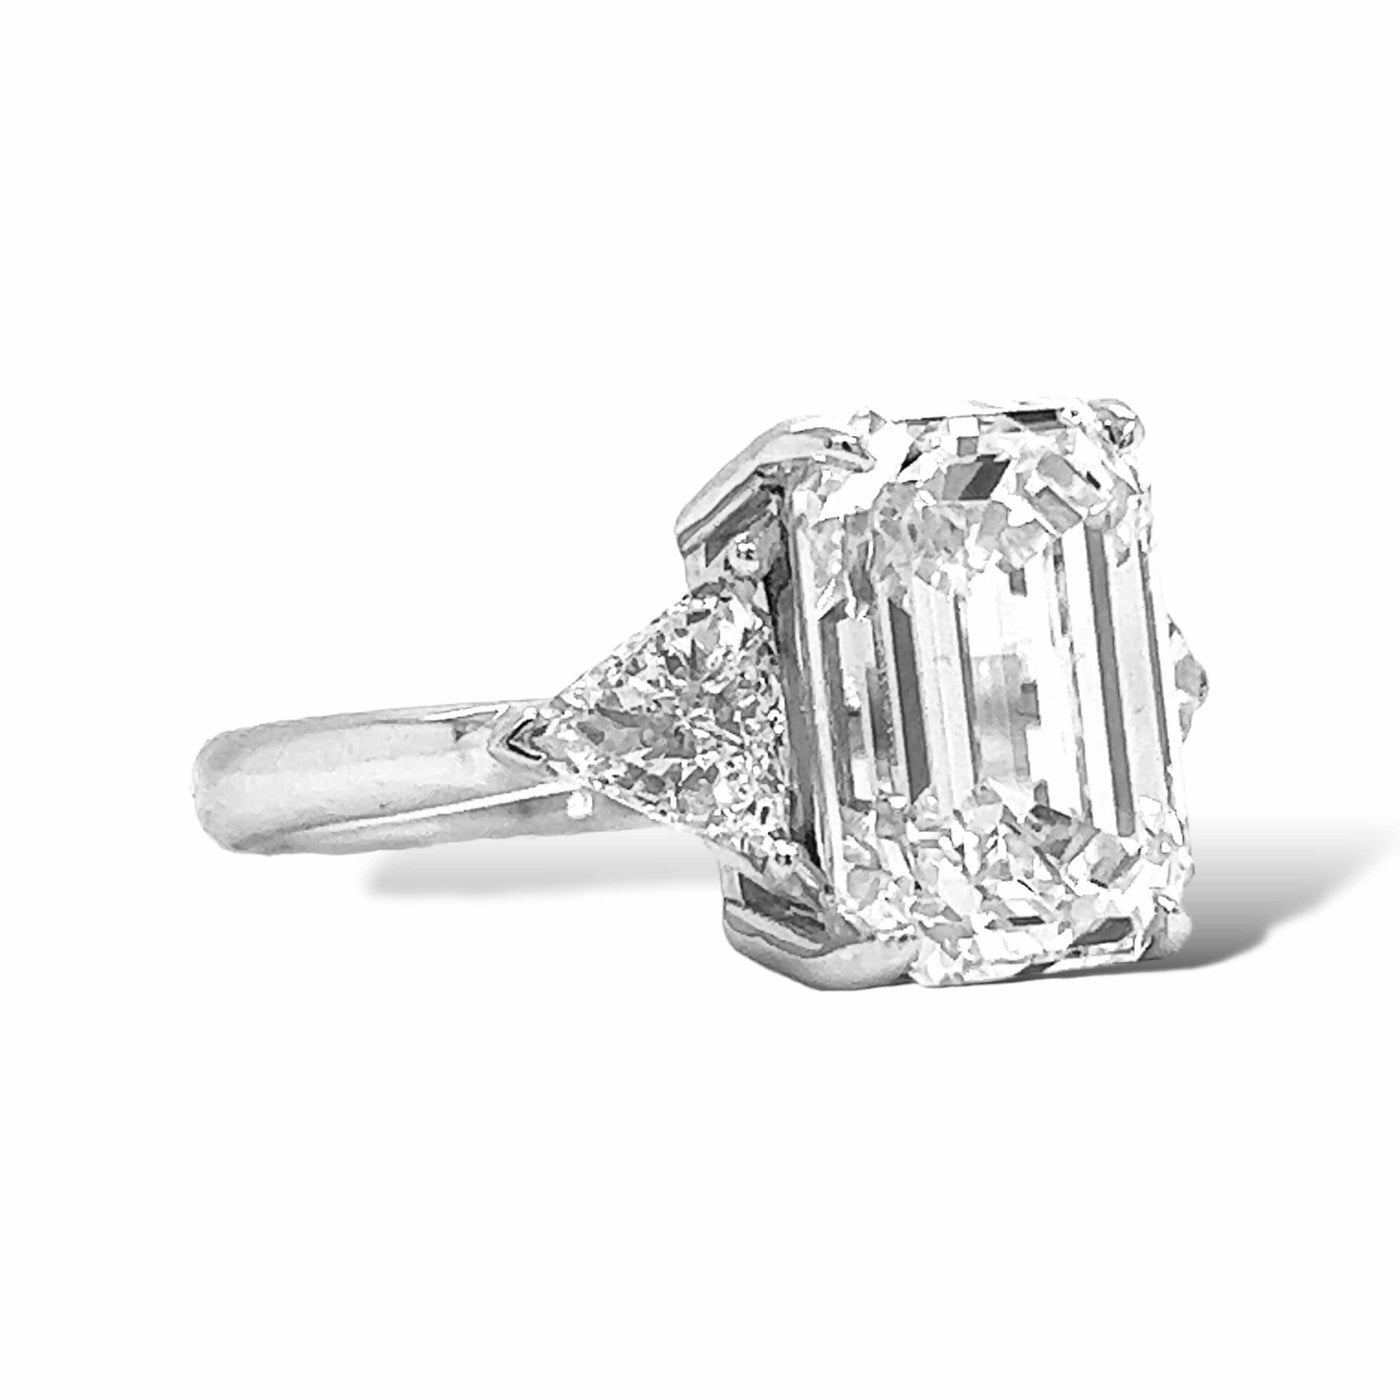 RADIANT CUT DIAMOND WITH TRIANGLE CUT DIAMONDS ON THE SIDES